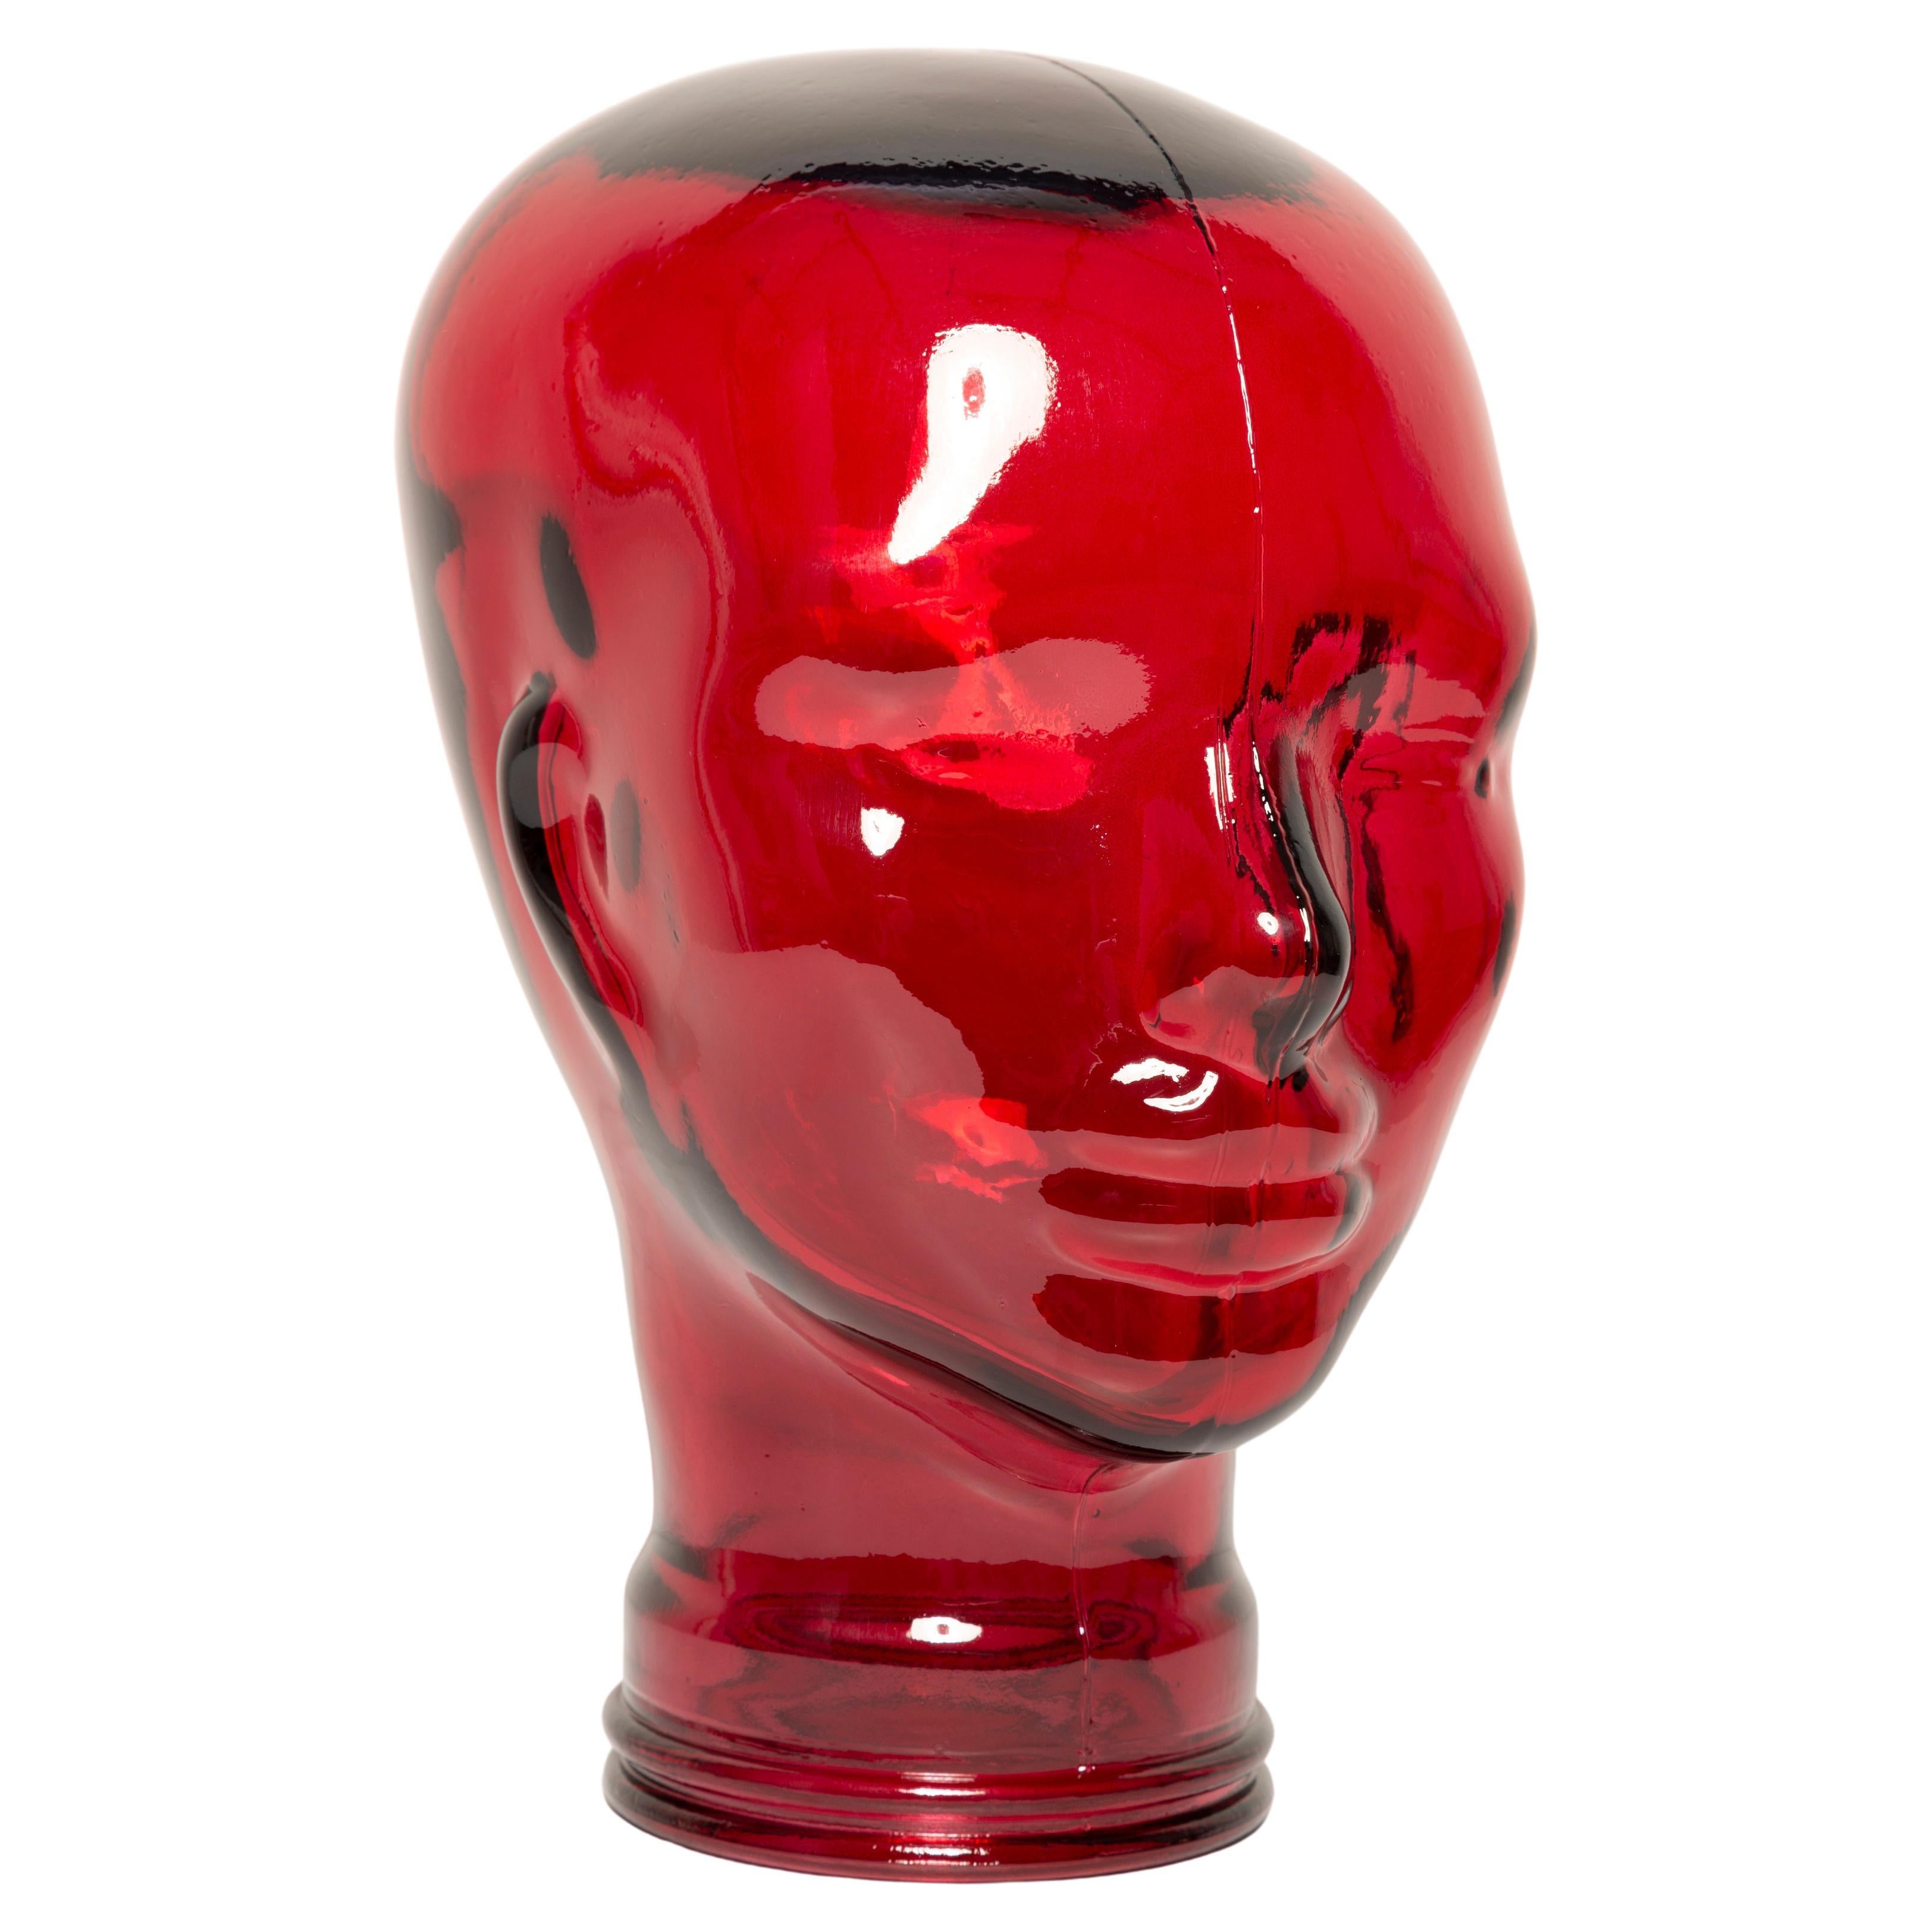 Red Vintage Decorative Mannequin Glass Head Sculpture, 1970s, Germany For Sale